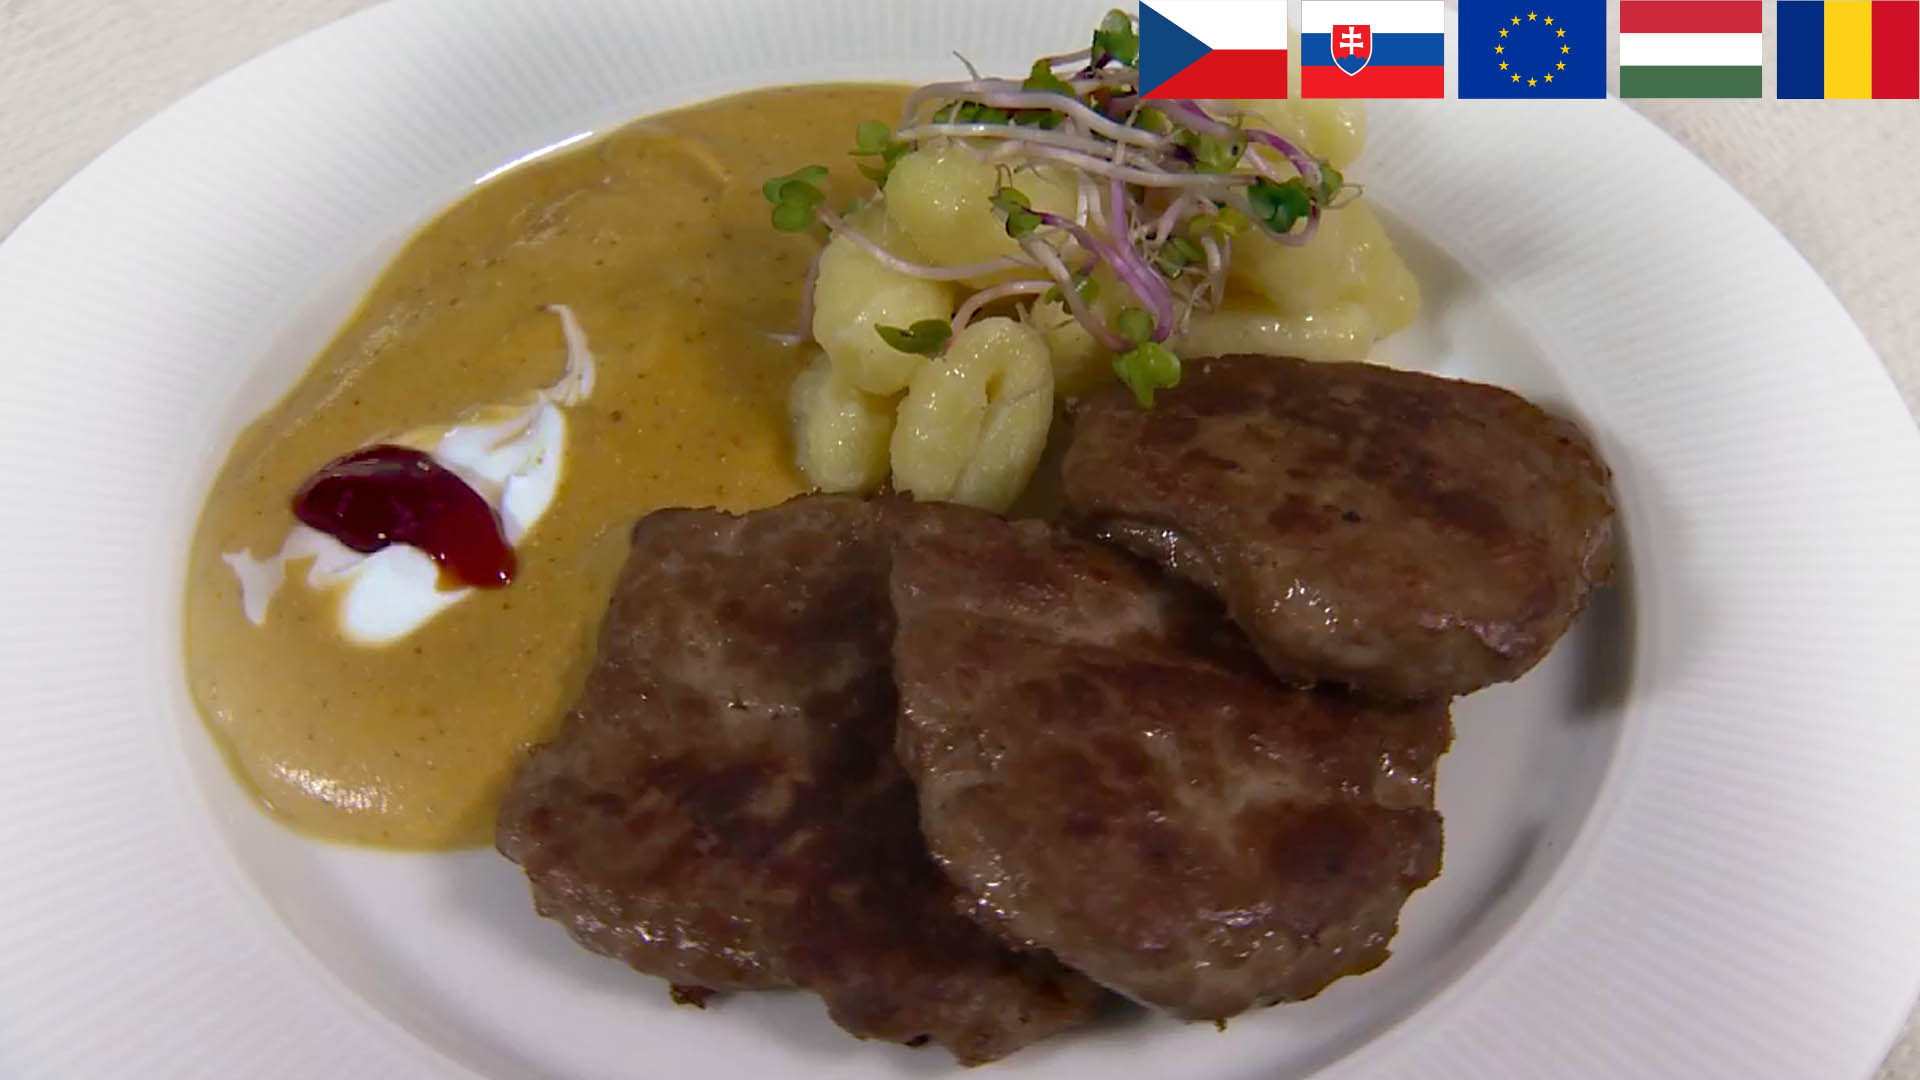 Recipe by Petr Stupka for deer leg steaks with rosehip sauce